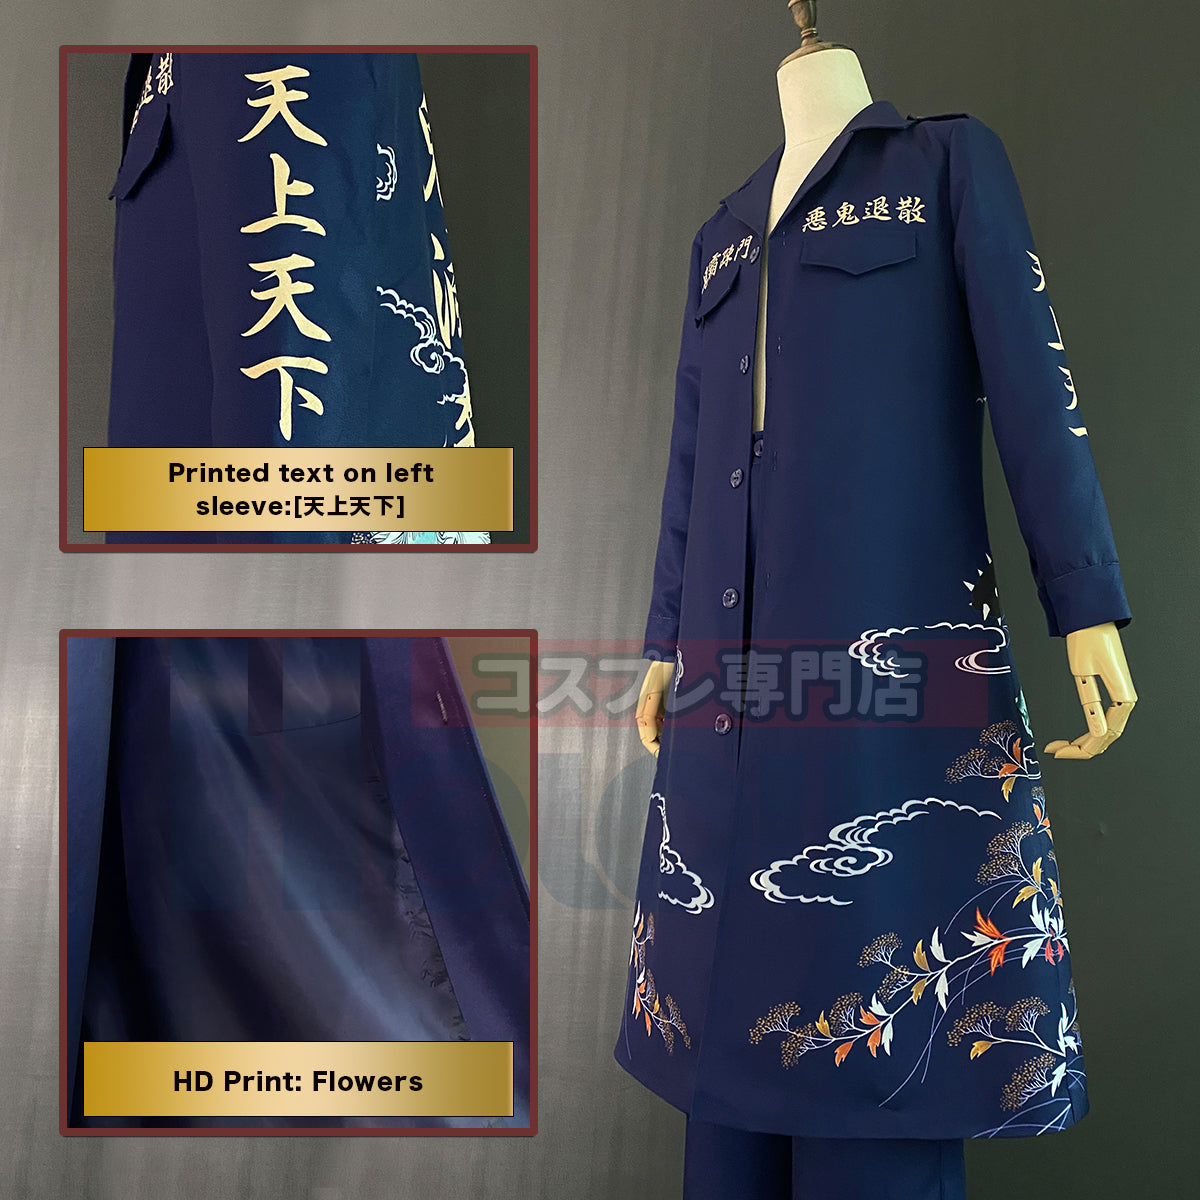 HOLOUN Bosozoku Cosplay Costume Special Attack Blue Color Uniform Coat Chinese Characters Japanese Festival Halloween Christmas New Year Gift